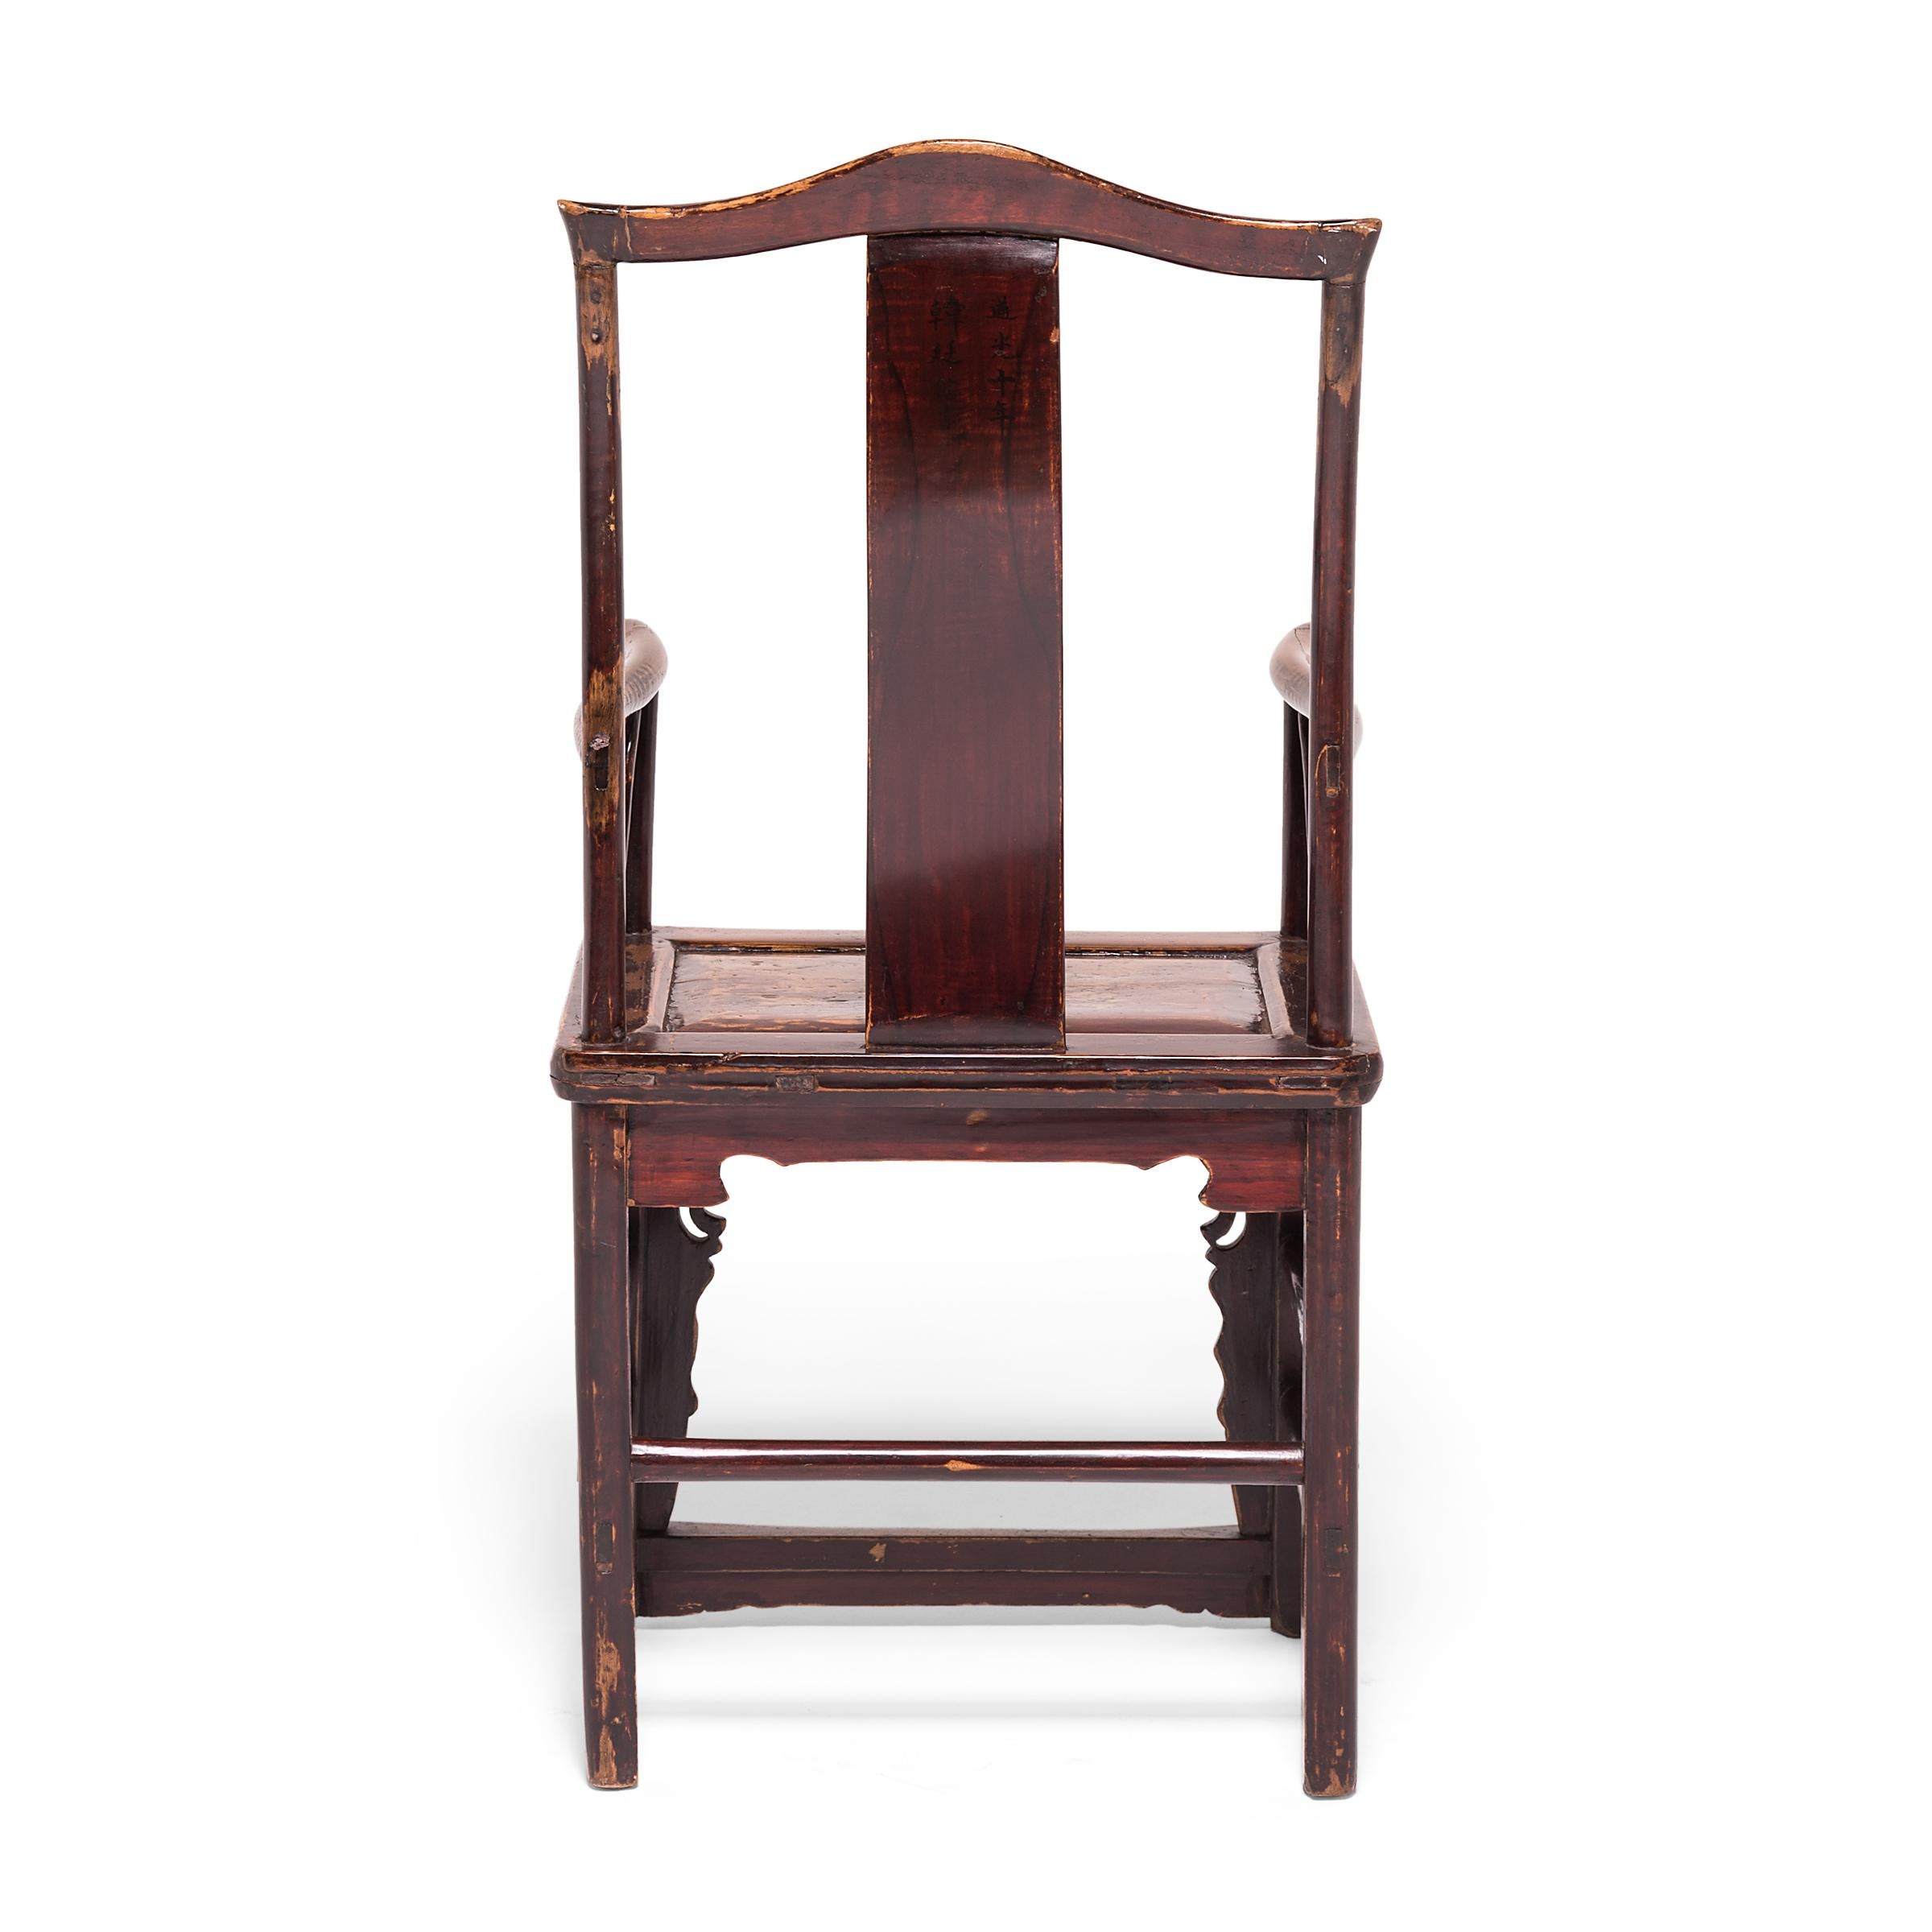 Pair of Chinese Southern Administrator's Chairs, c. 1850 For Sale 3